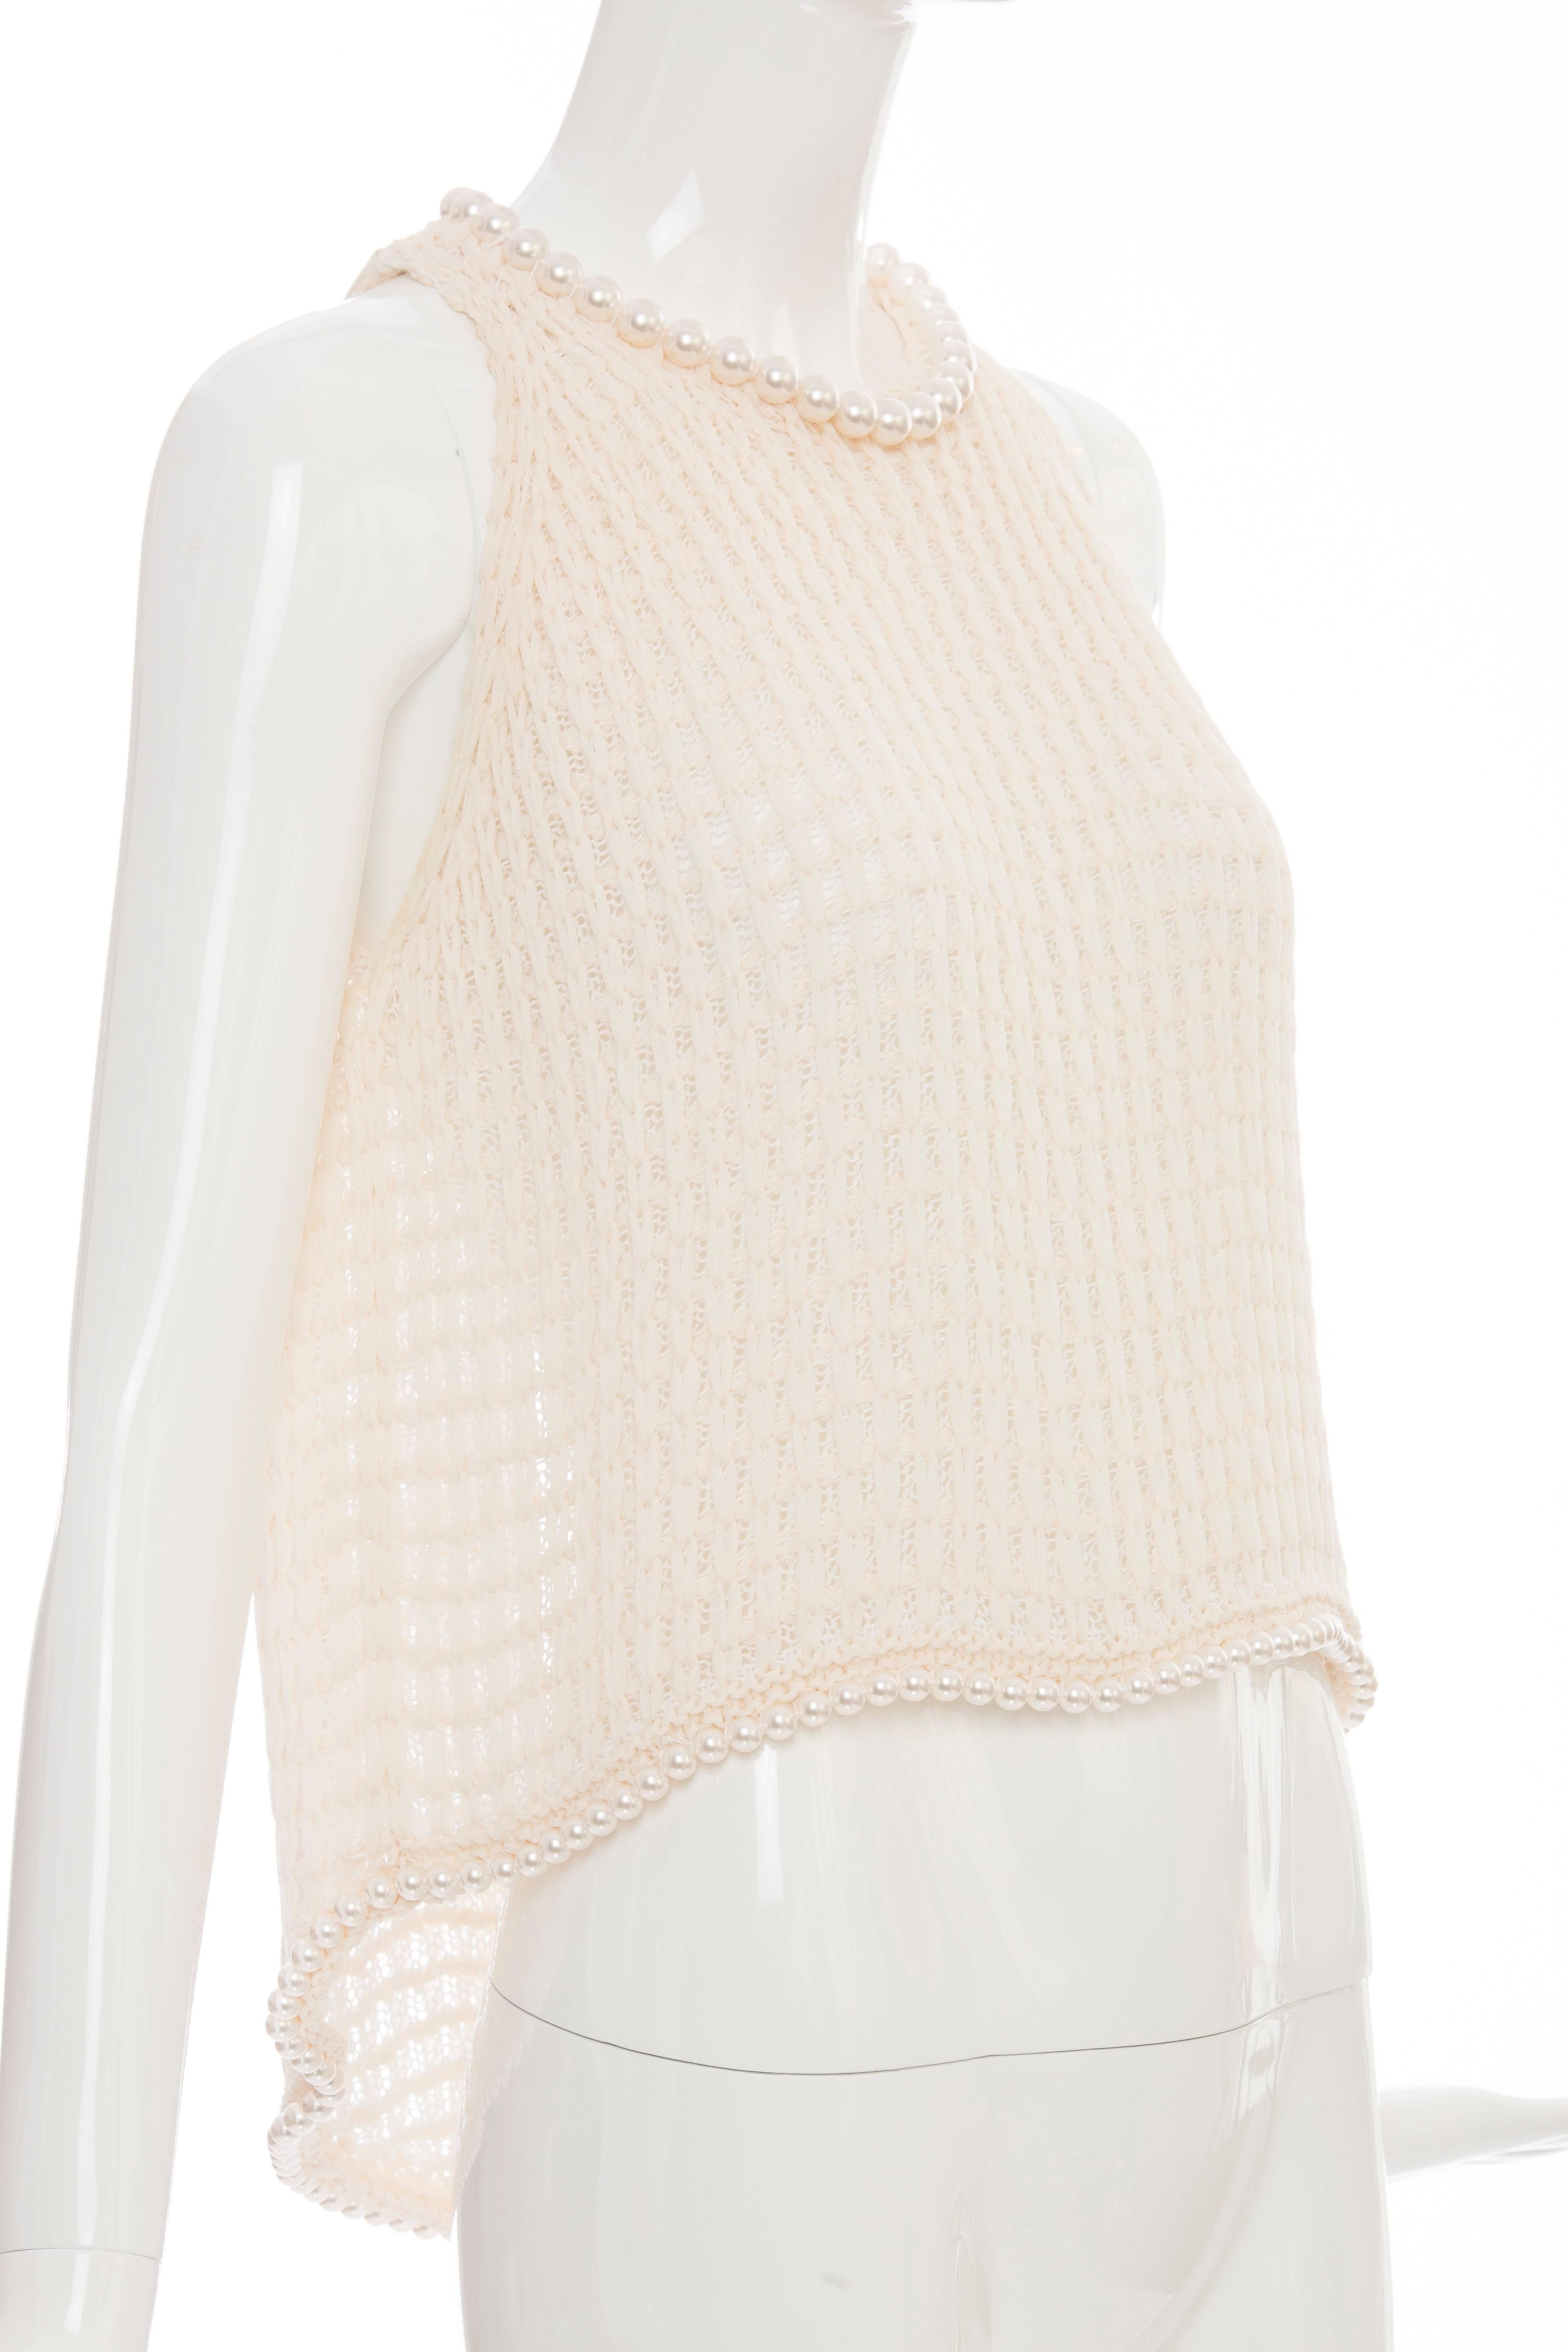 Chanel Cream Silk Blend Open Knit Top With Pearl Embellishments, Spring 2009 In Excellent Condition In Cincinnati, OH